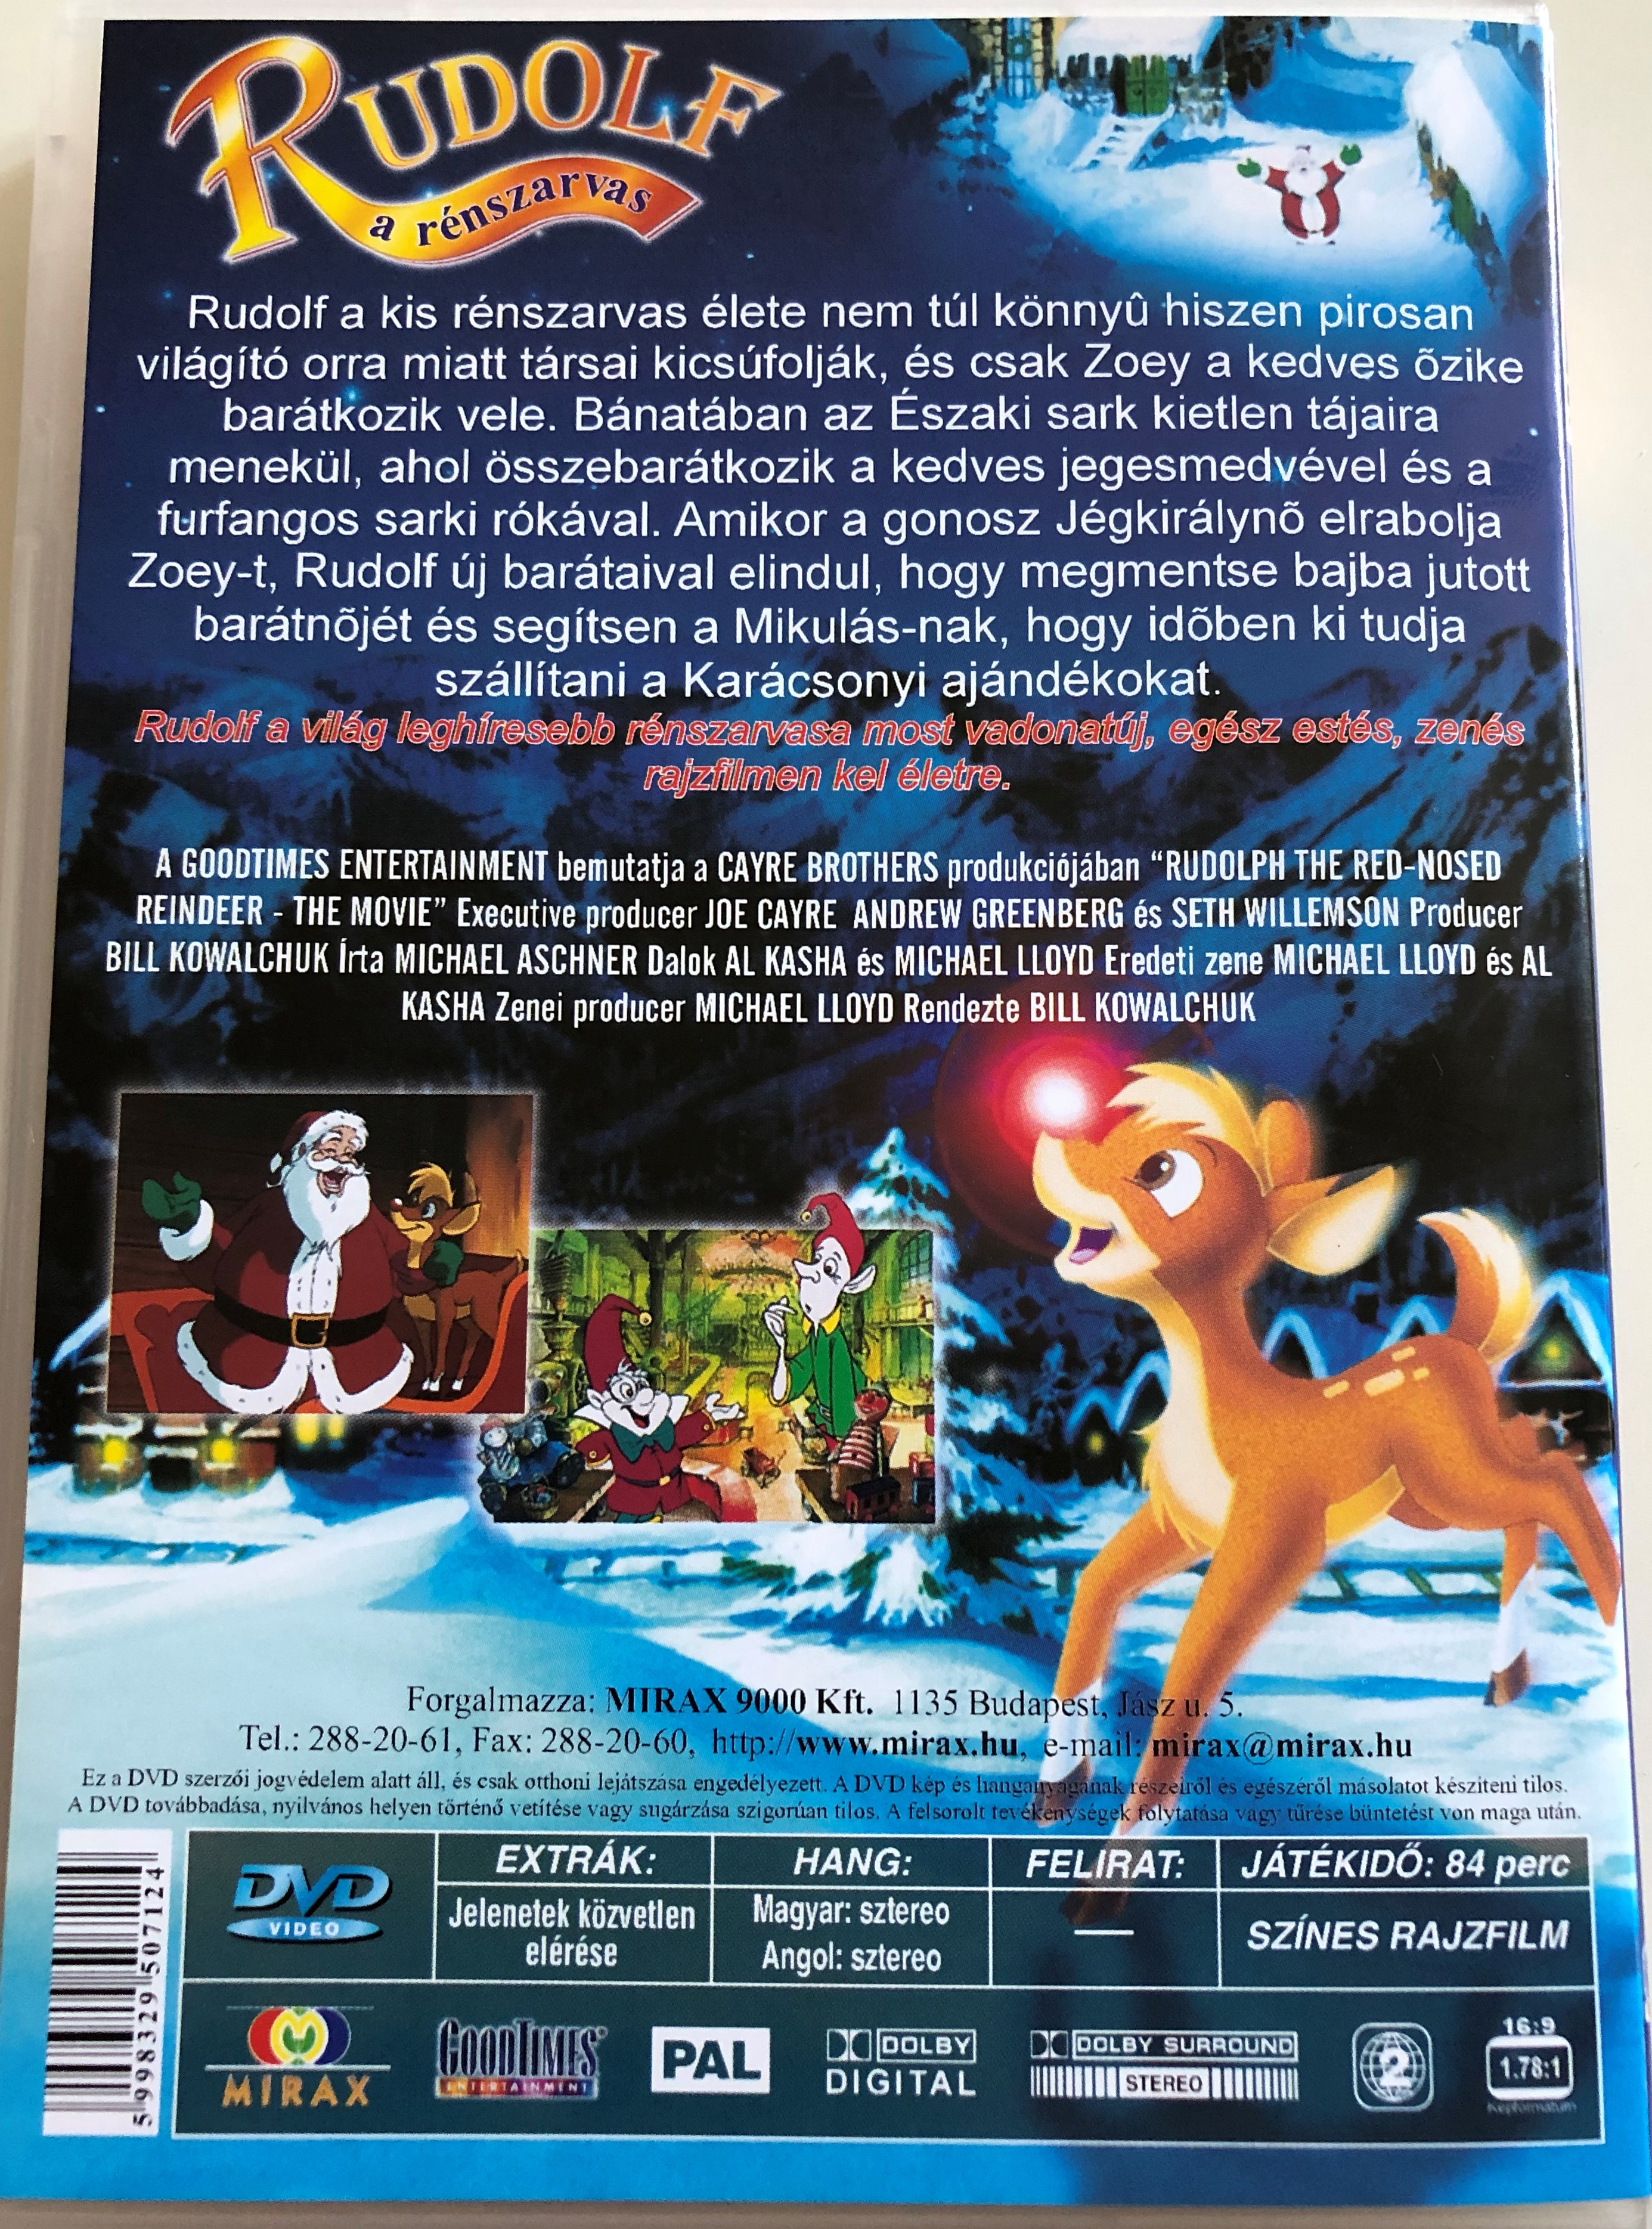 Rudolph the red nosed reindeer the movie 1998 poster